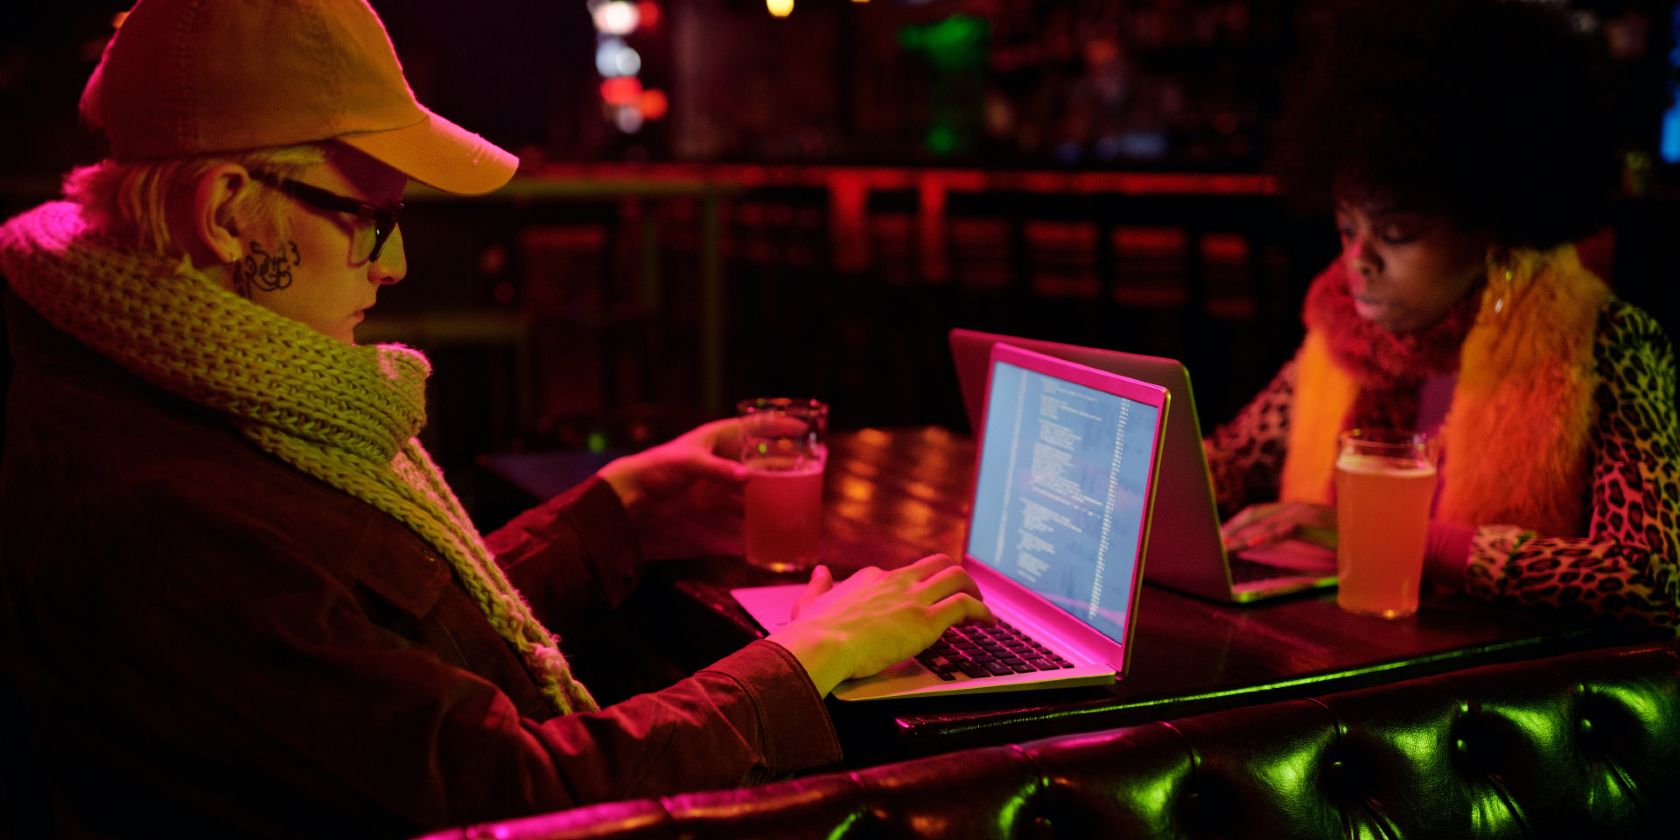 A man and a woman, facing each other, using their laptops in a bar